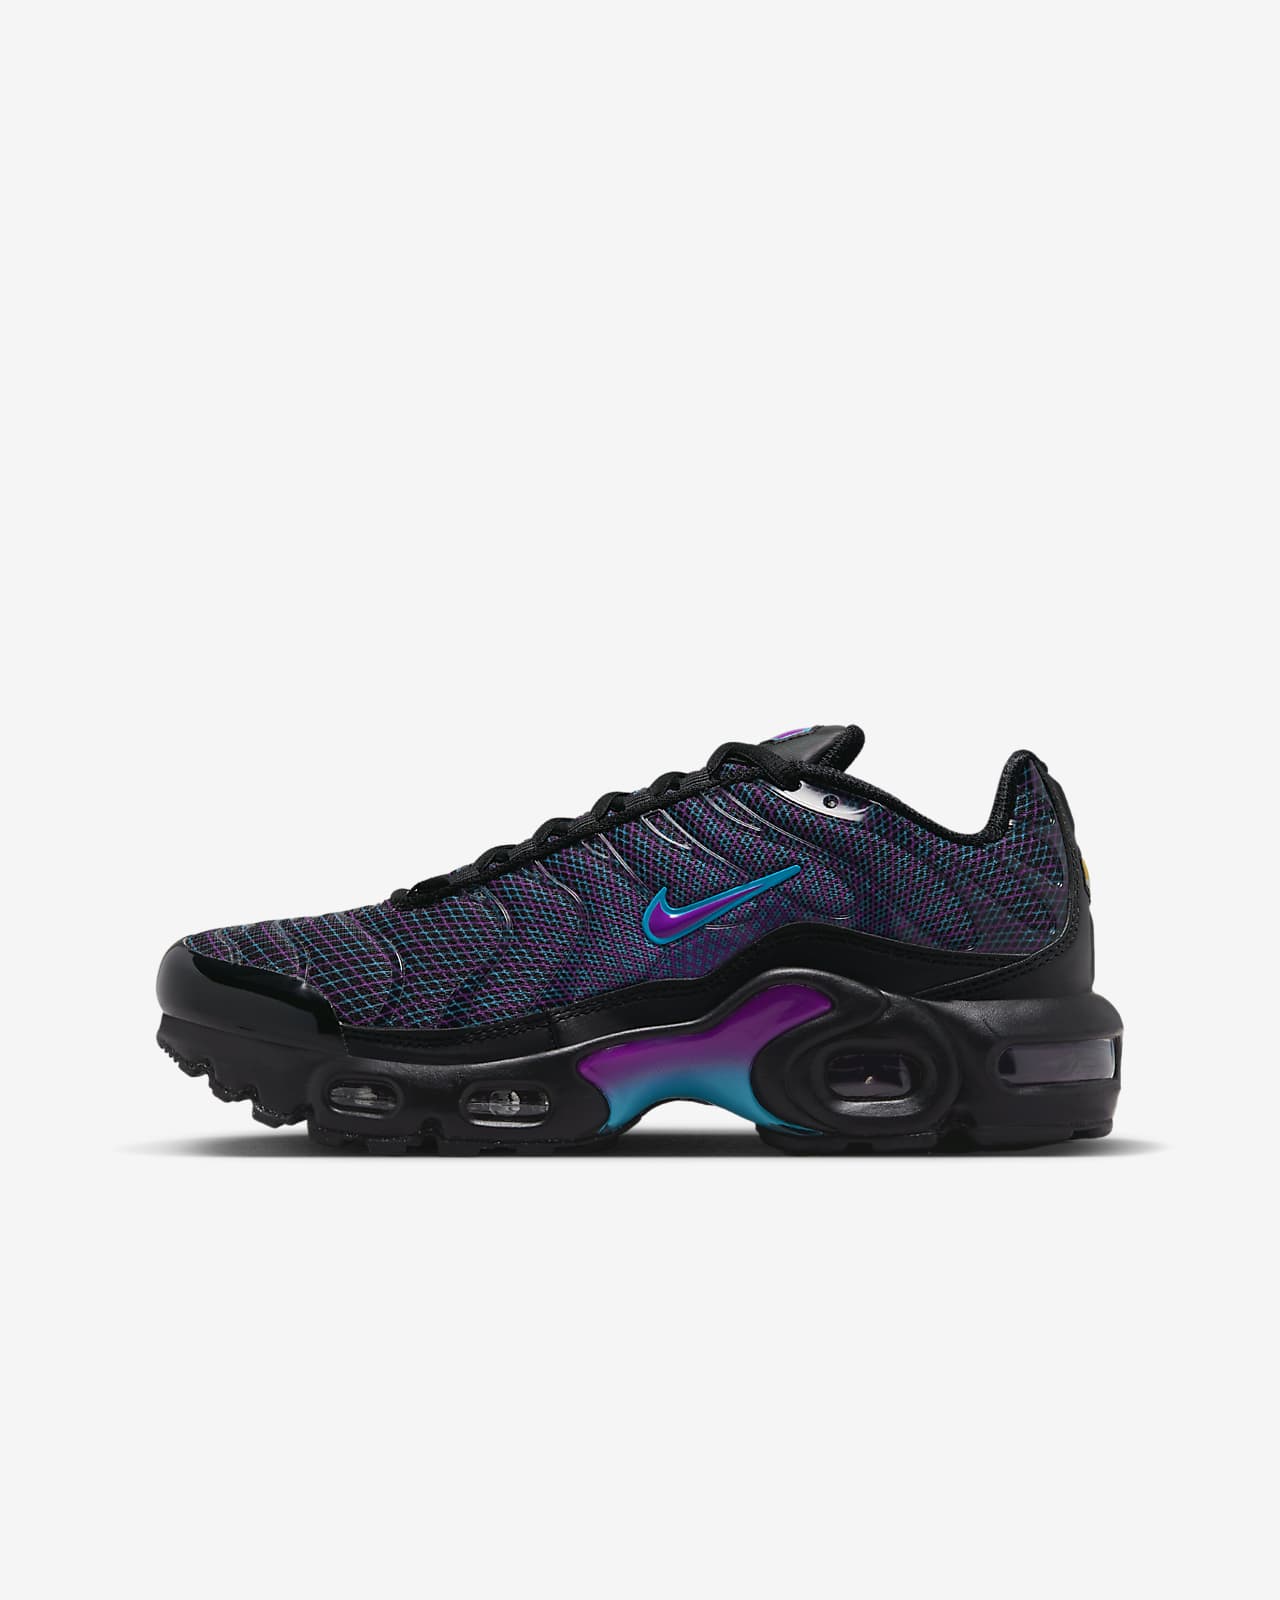 Make a Statement with Nike Purple and Black Shoes